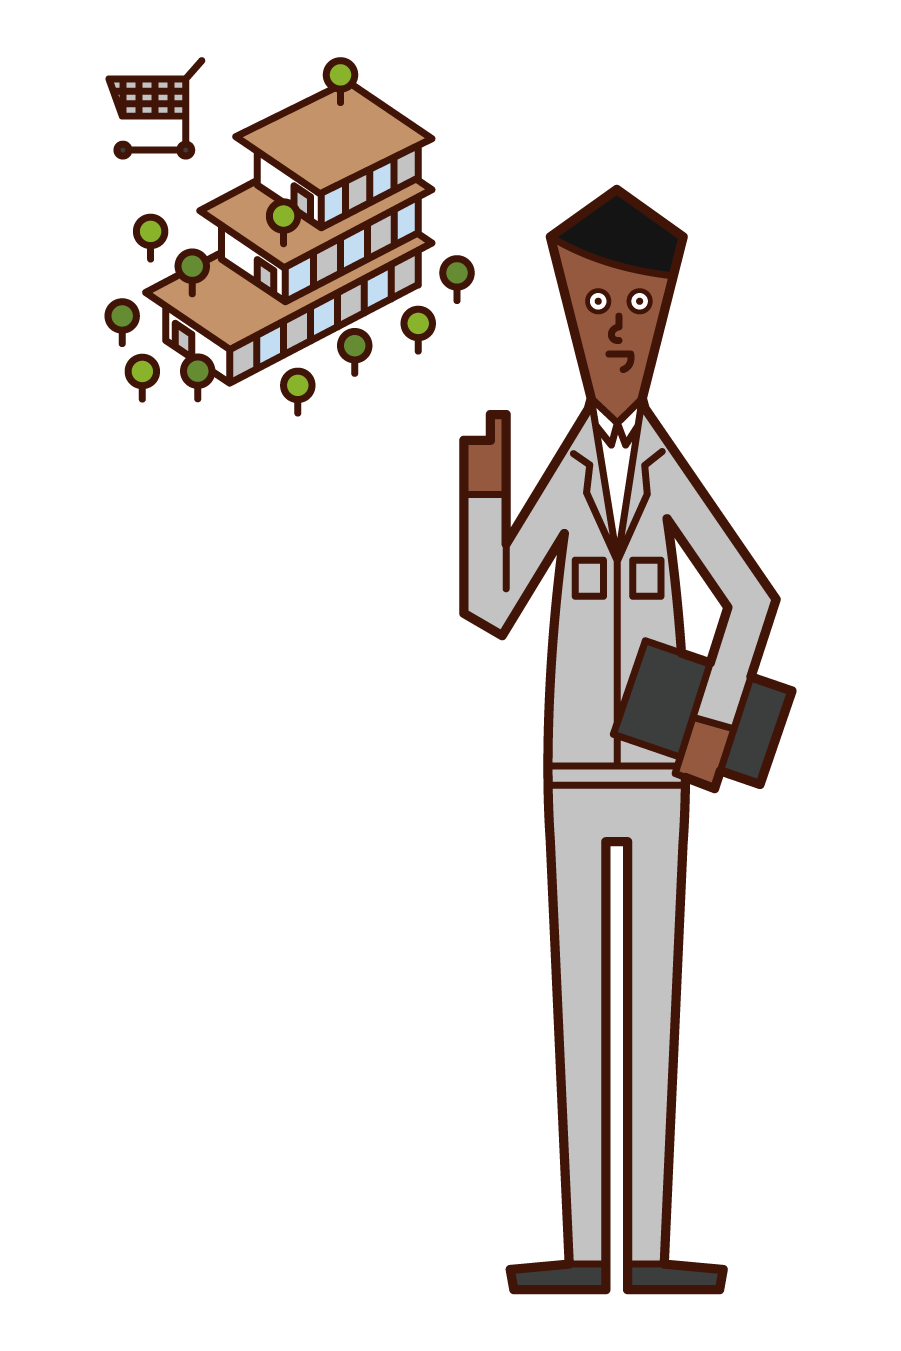 Illustration of a commercial facility worker (man)